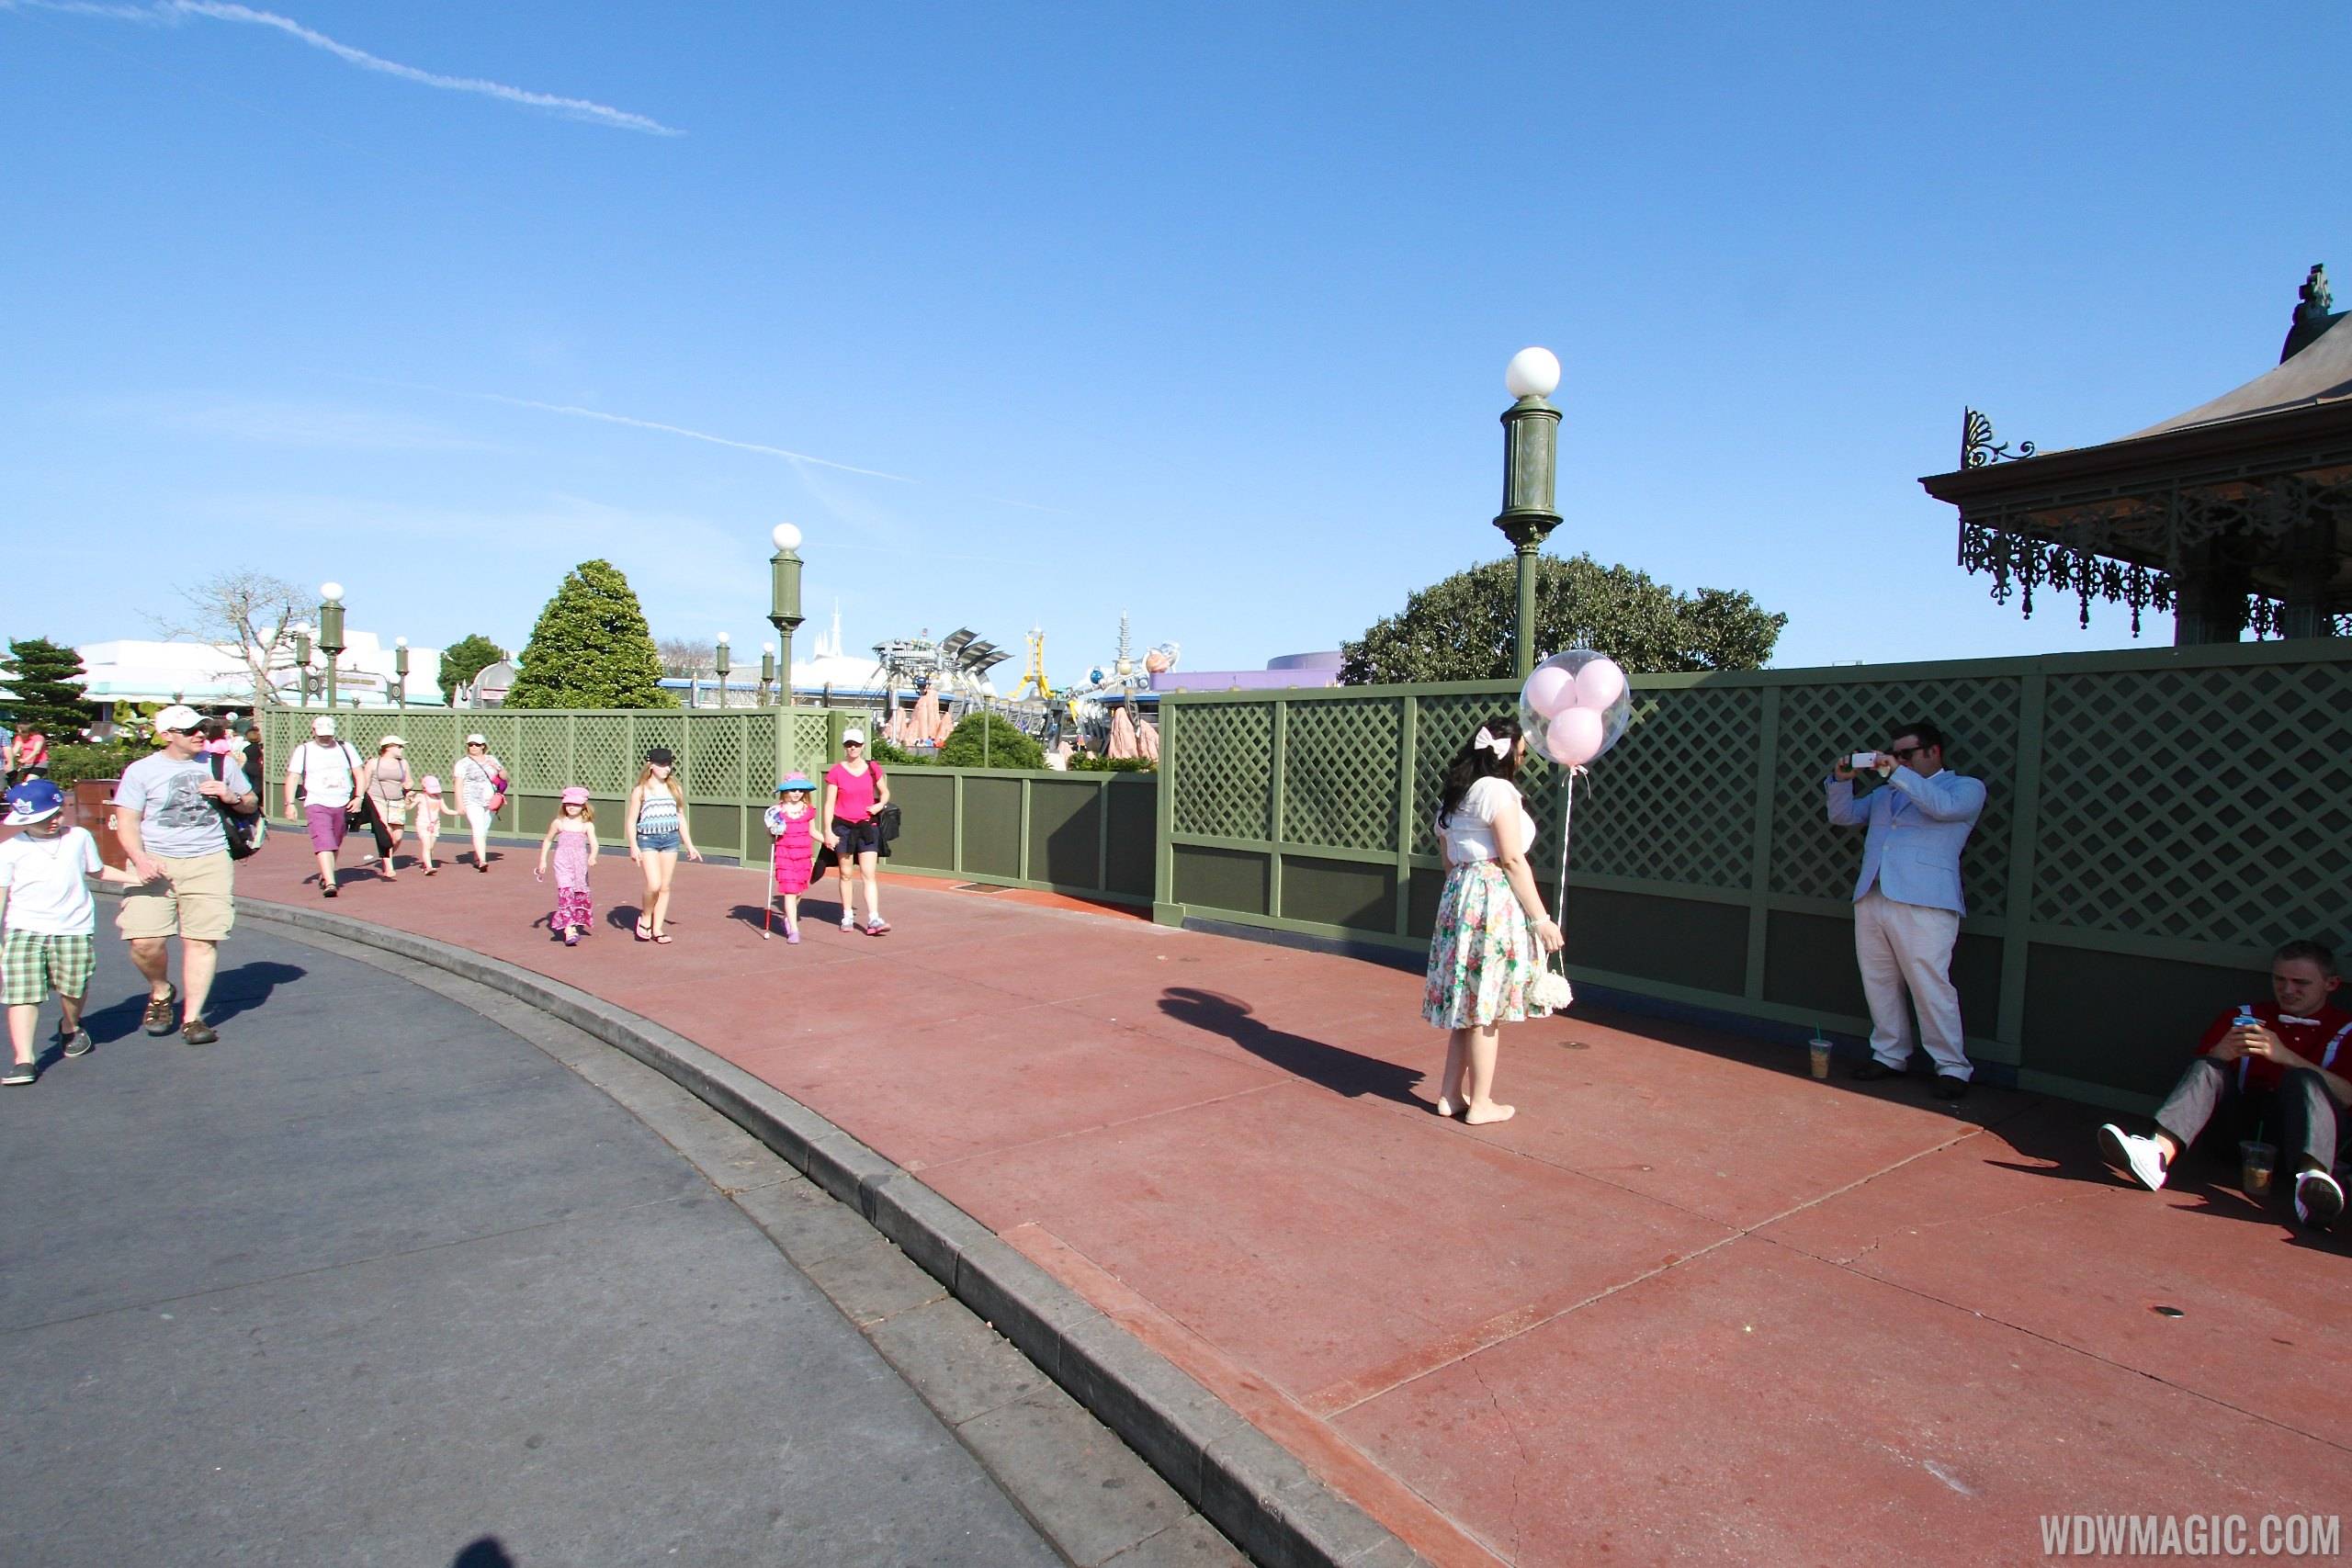 PHOTOS - Construction walls up around large sections of the hub at the Magic Kingdom